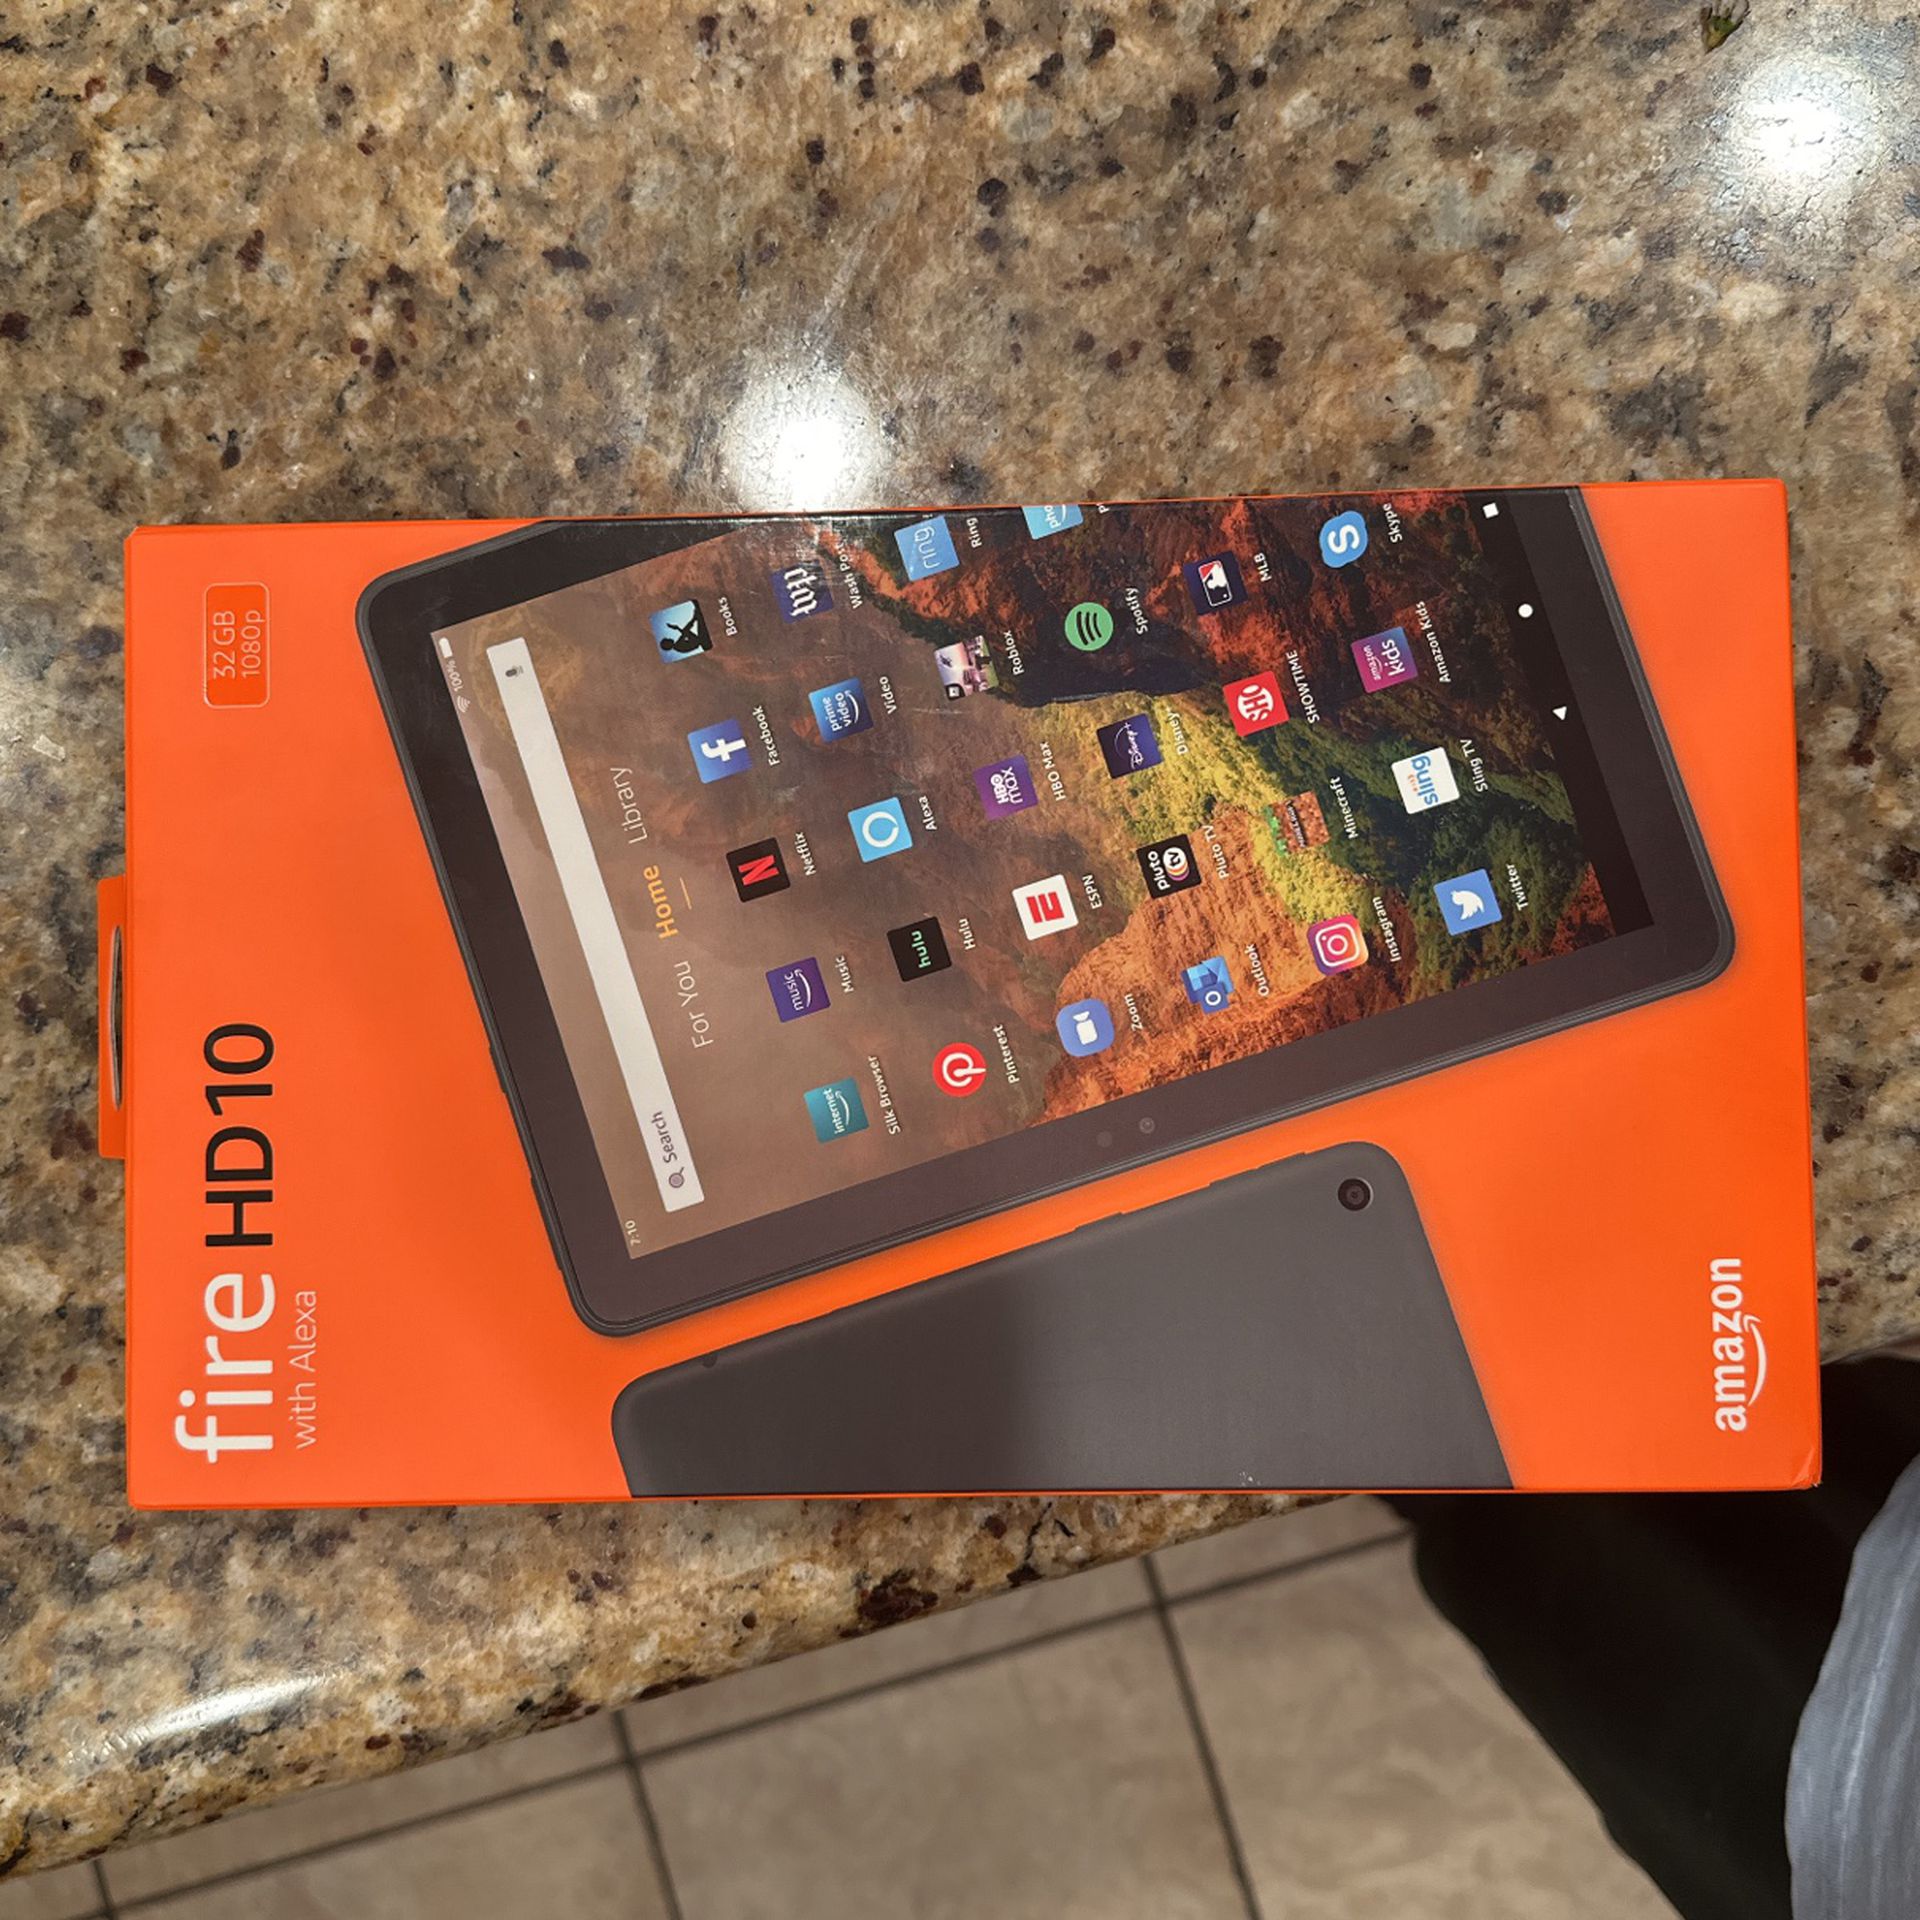 Amazon Fire HD 10 tablet with Alexa